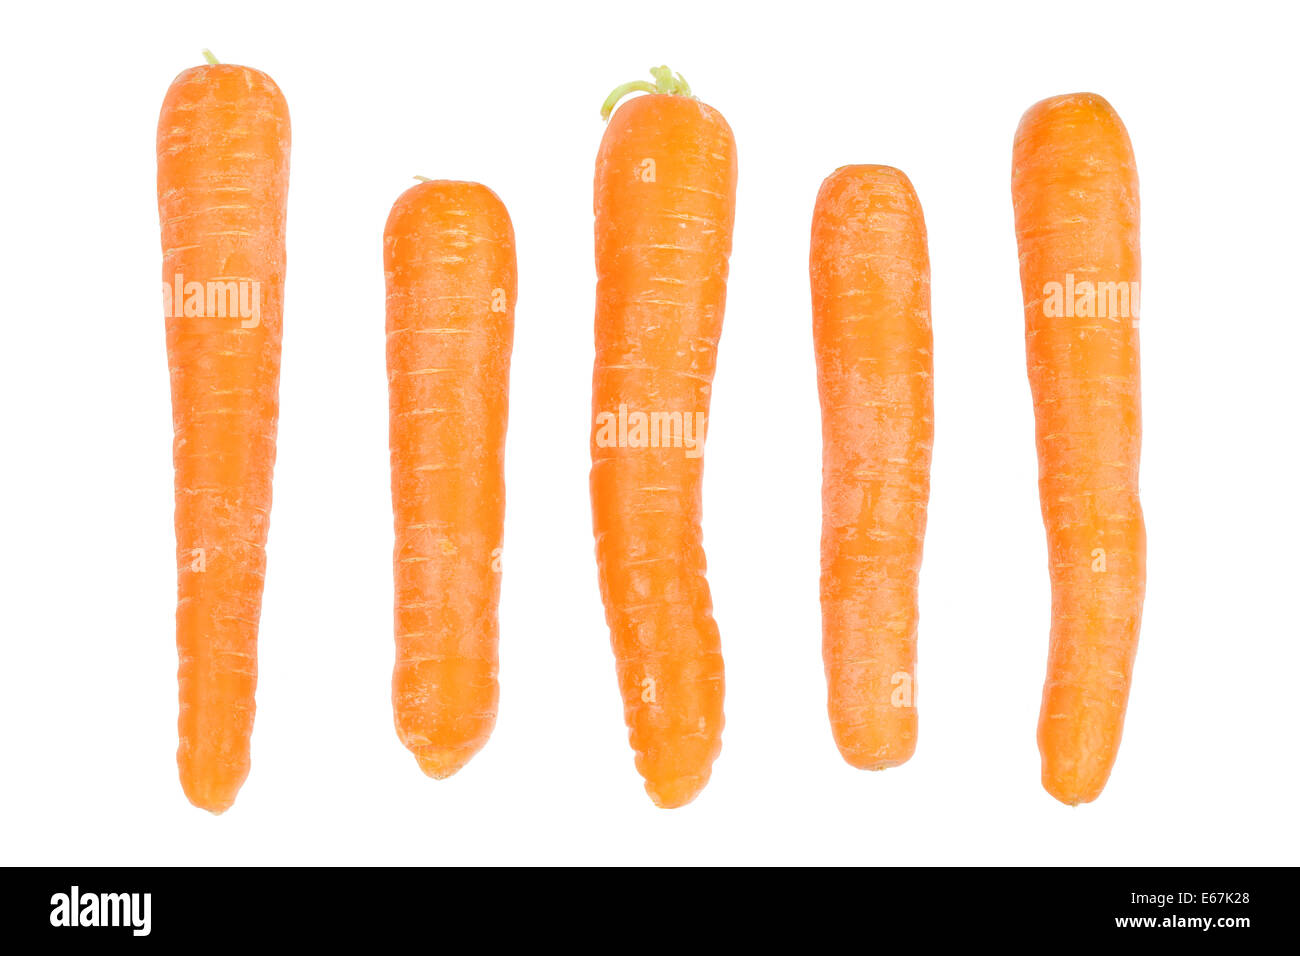 Carrots on a white background Stock Photo